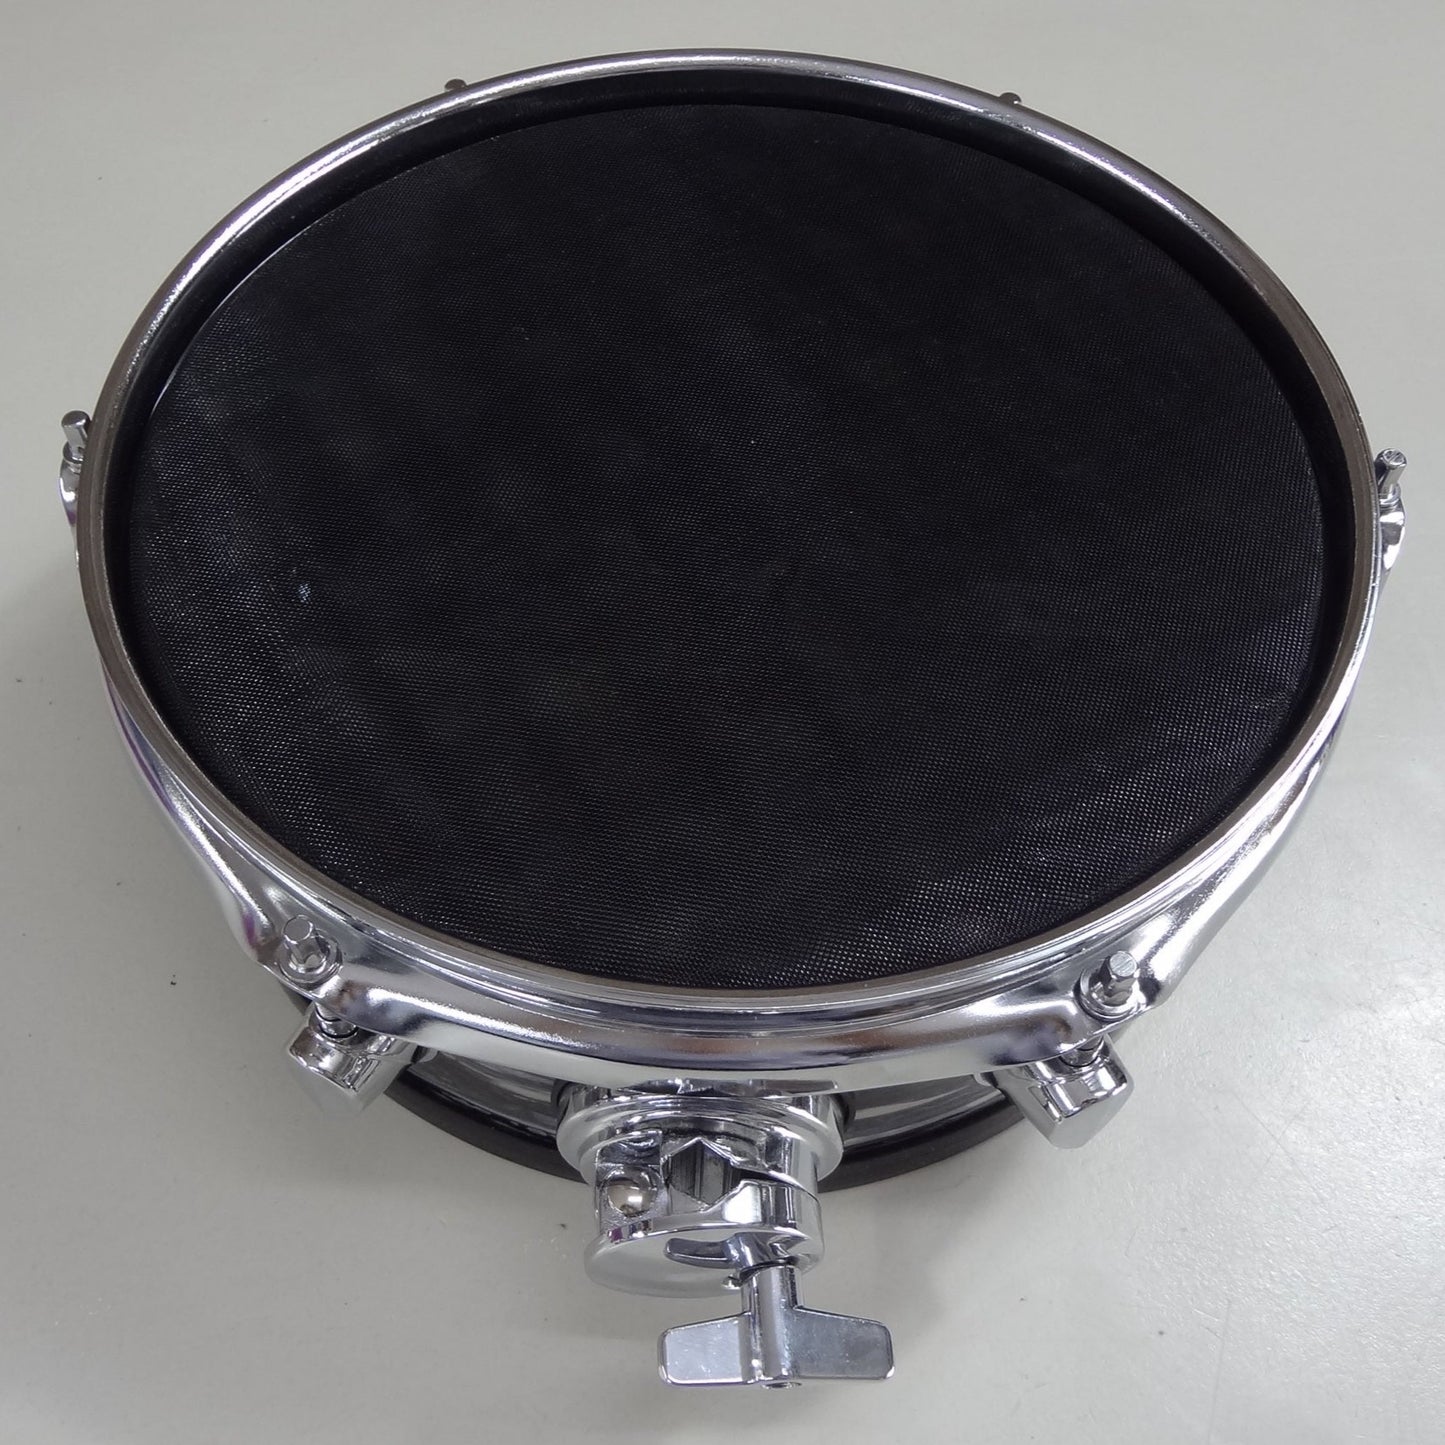 New 10 Inch Custom Electronic Snare Drum - Oyster wrap.